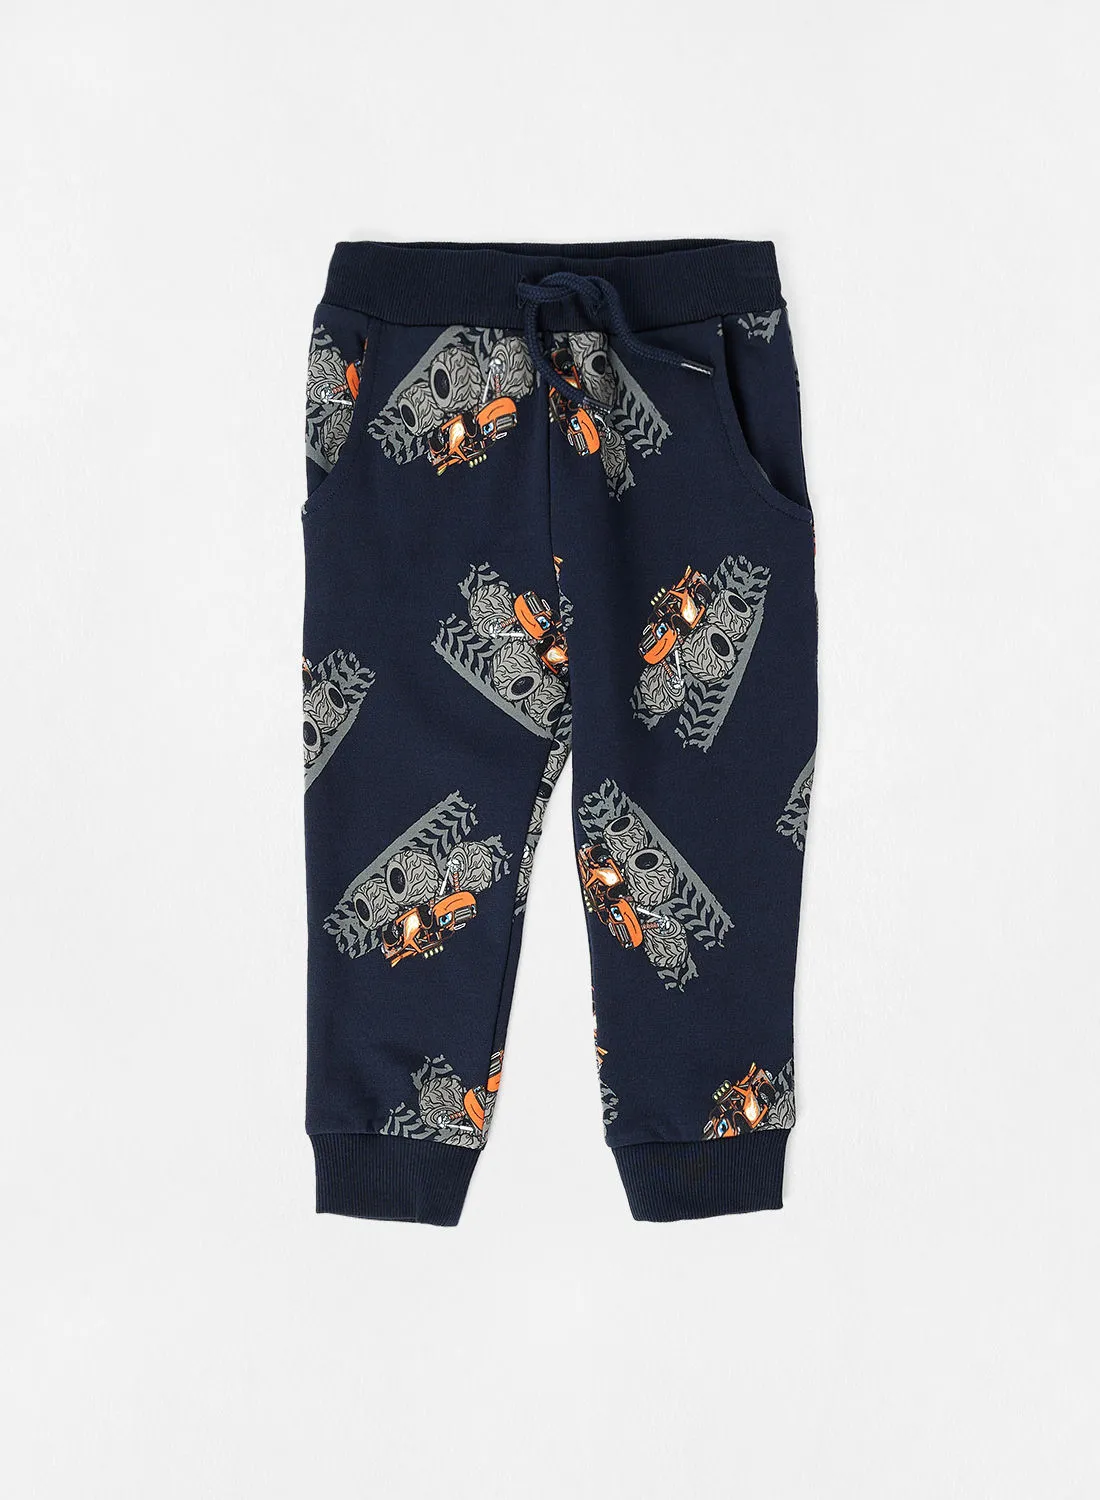 NAME IT Kids All-Over Print Sweatpants Navy